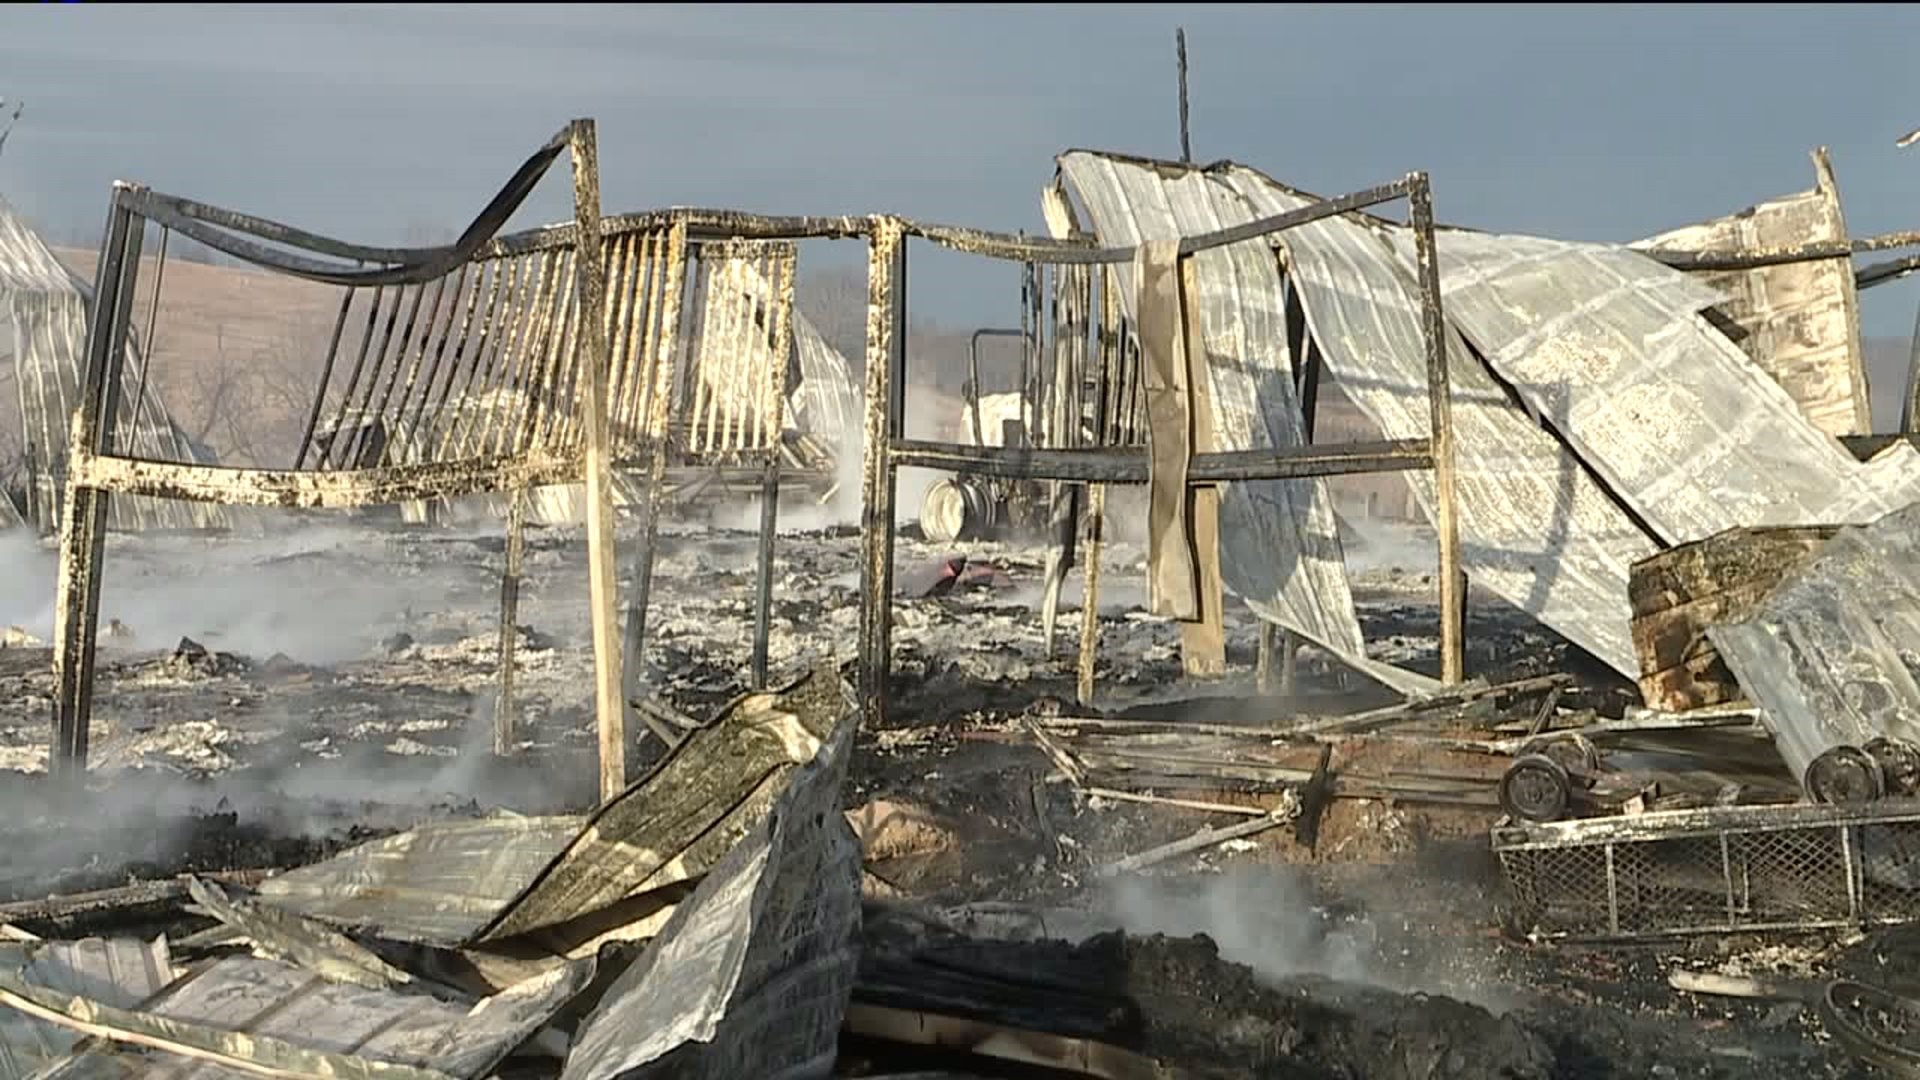 Horse Barn Destroyed by Flames in Carbon County